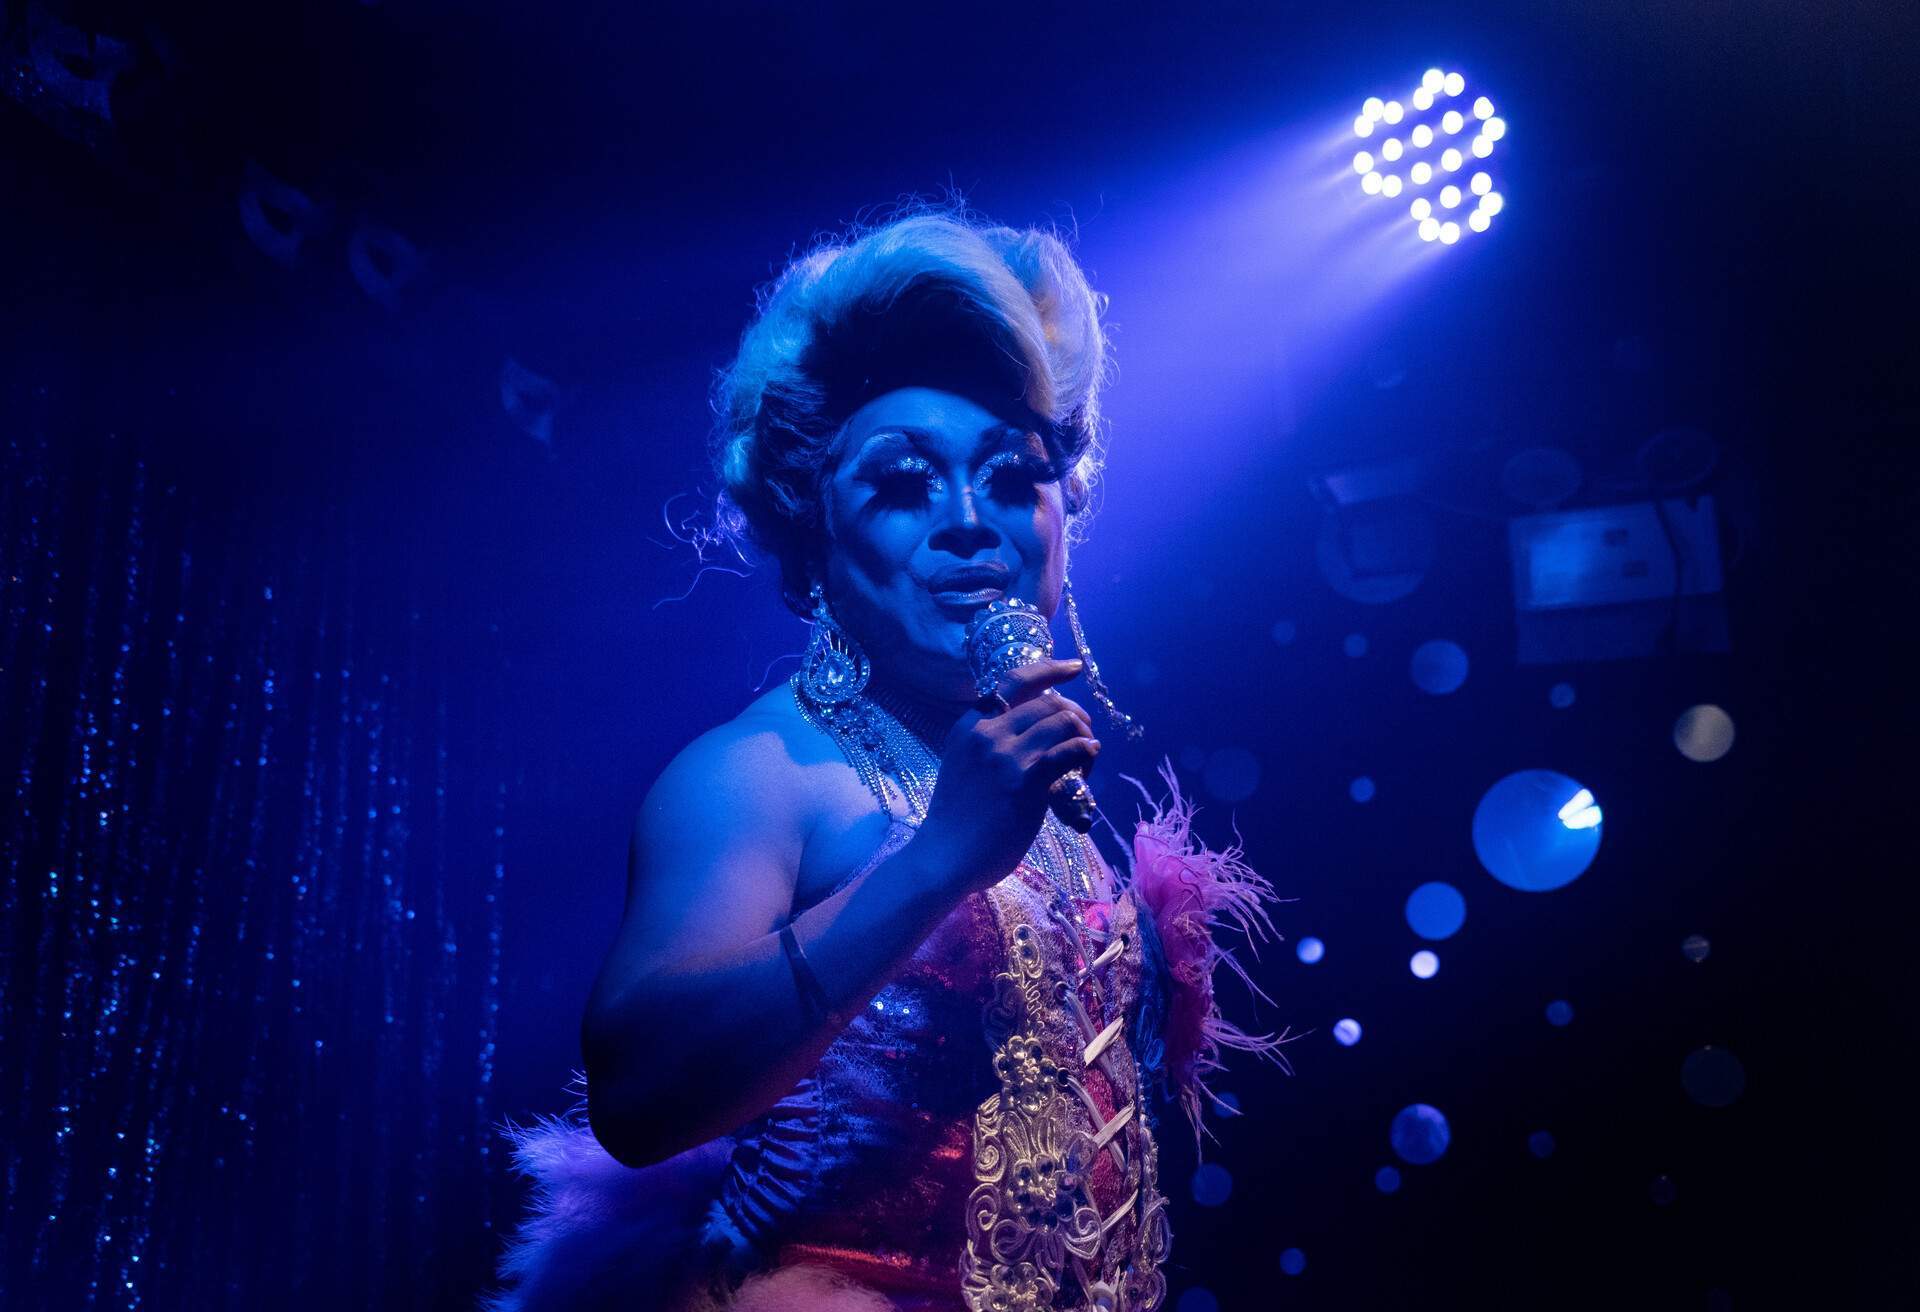 A drag queen illuminated with ultraviolet lights held a microphone while performing.